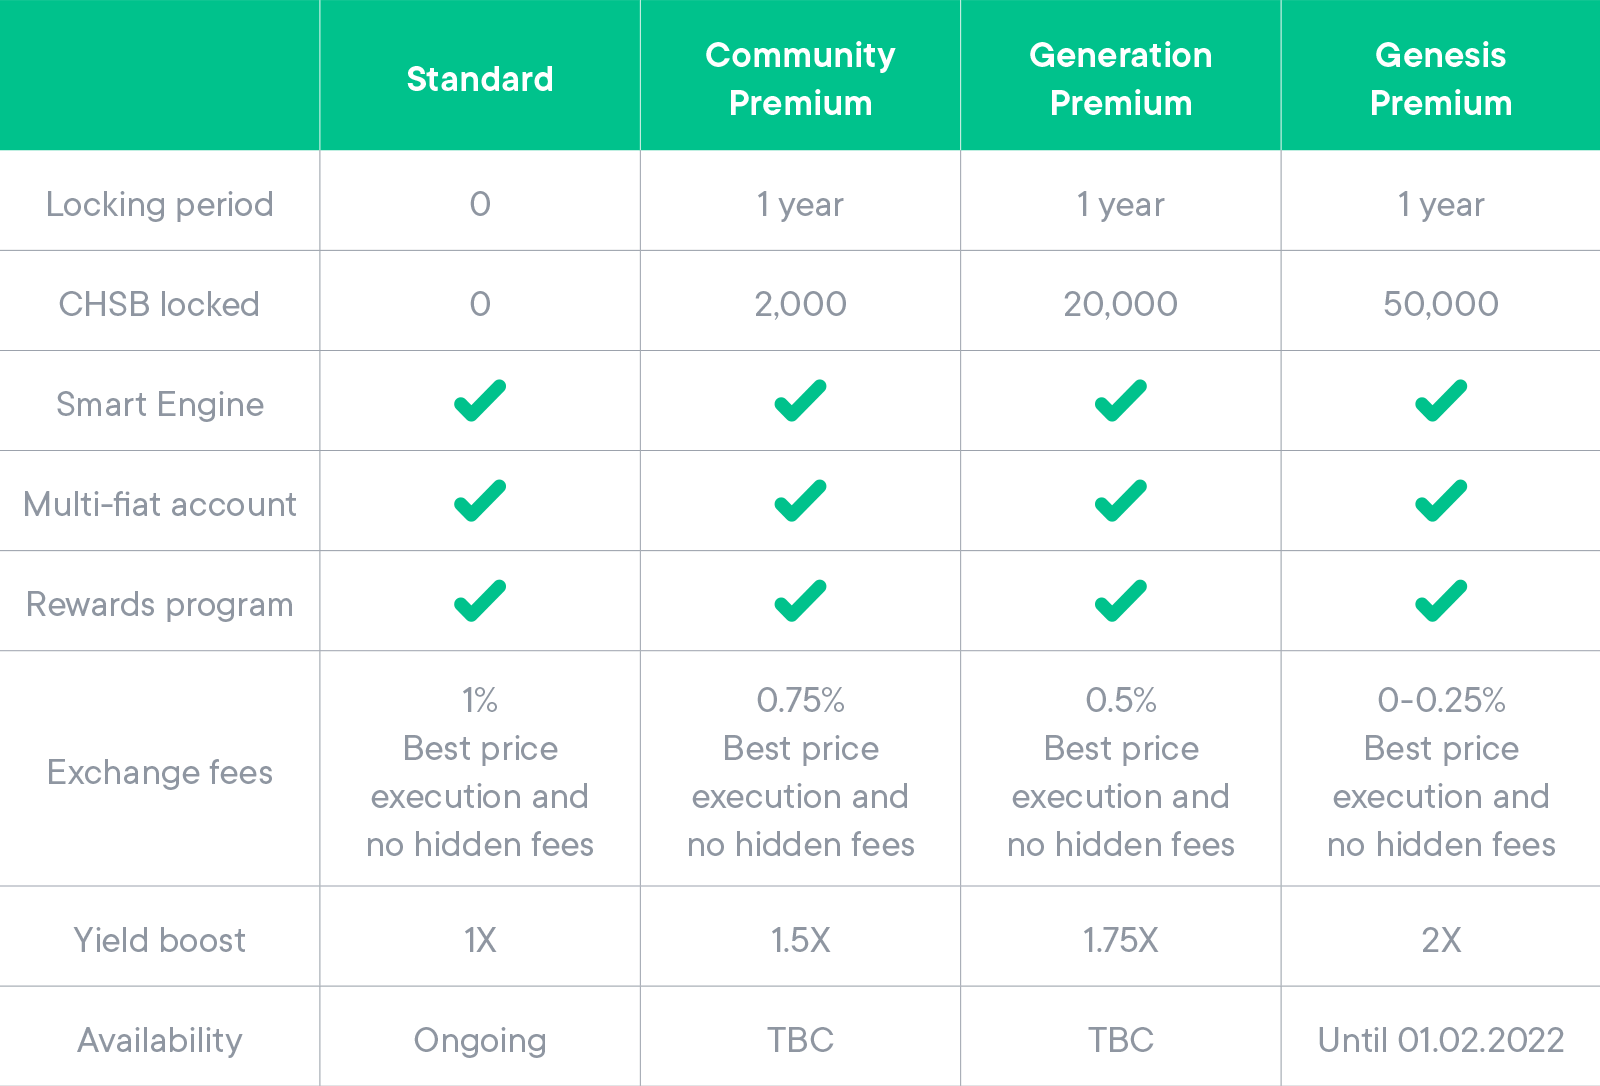 Comparative table of Premium tiers